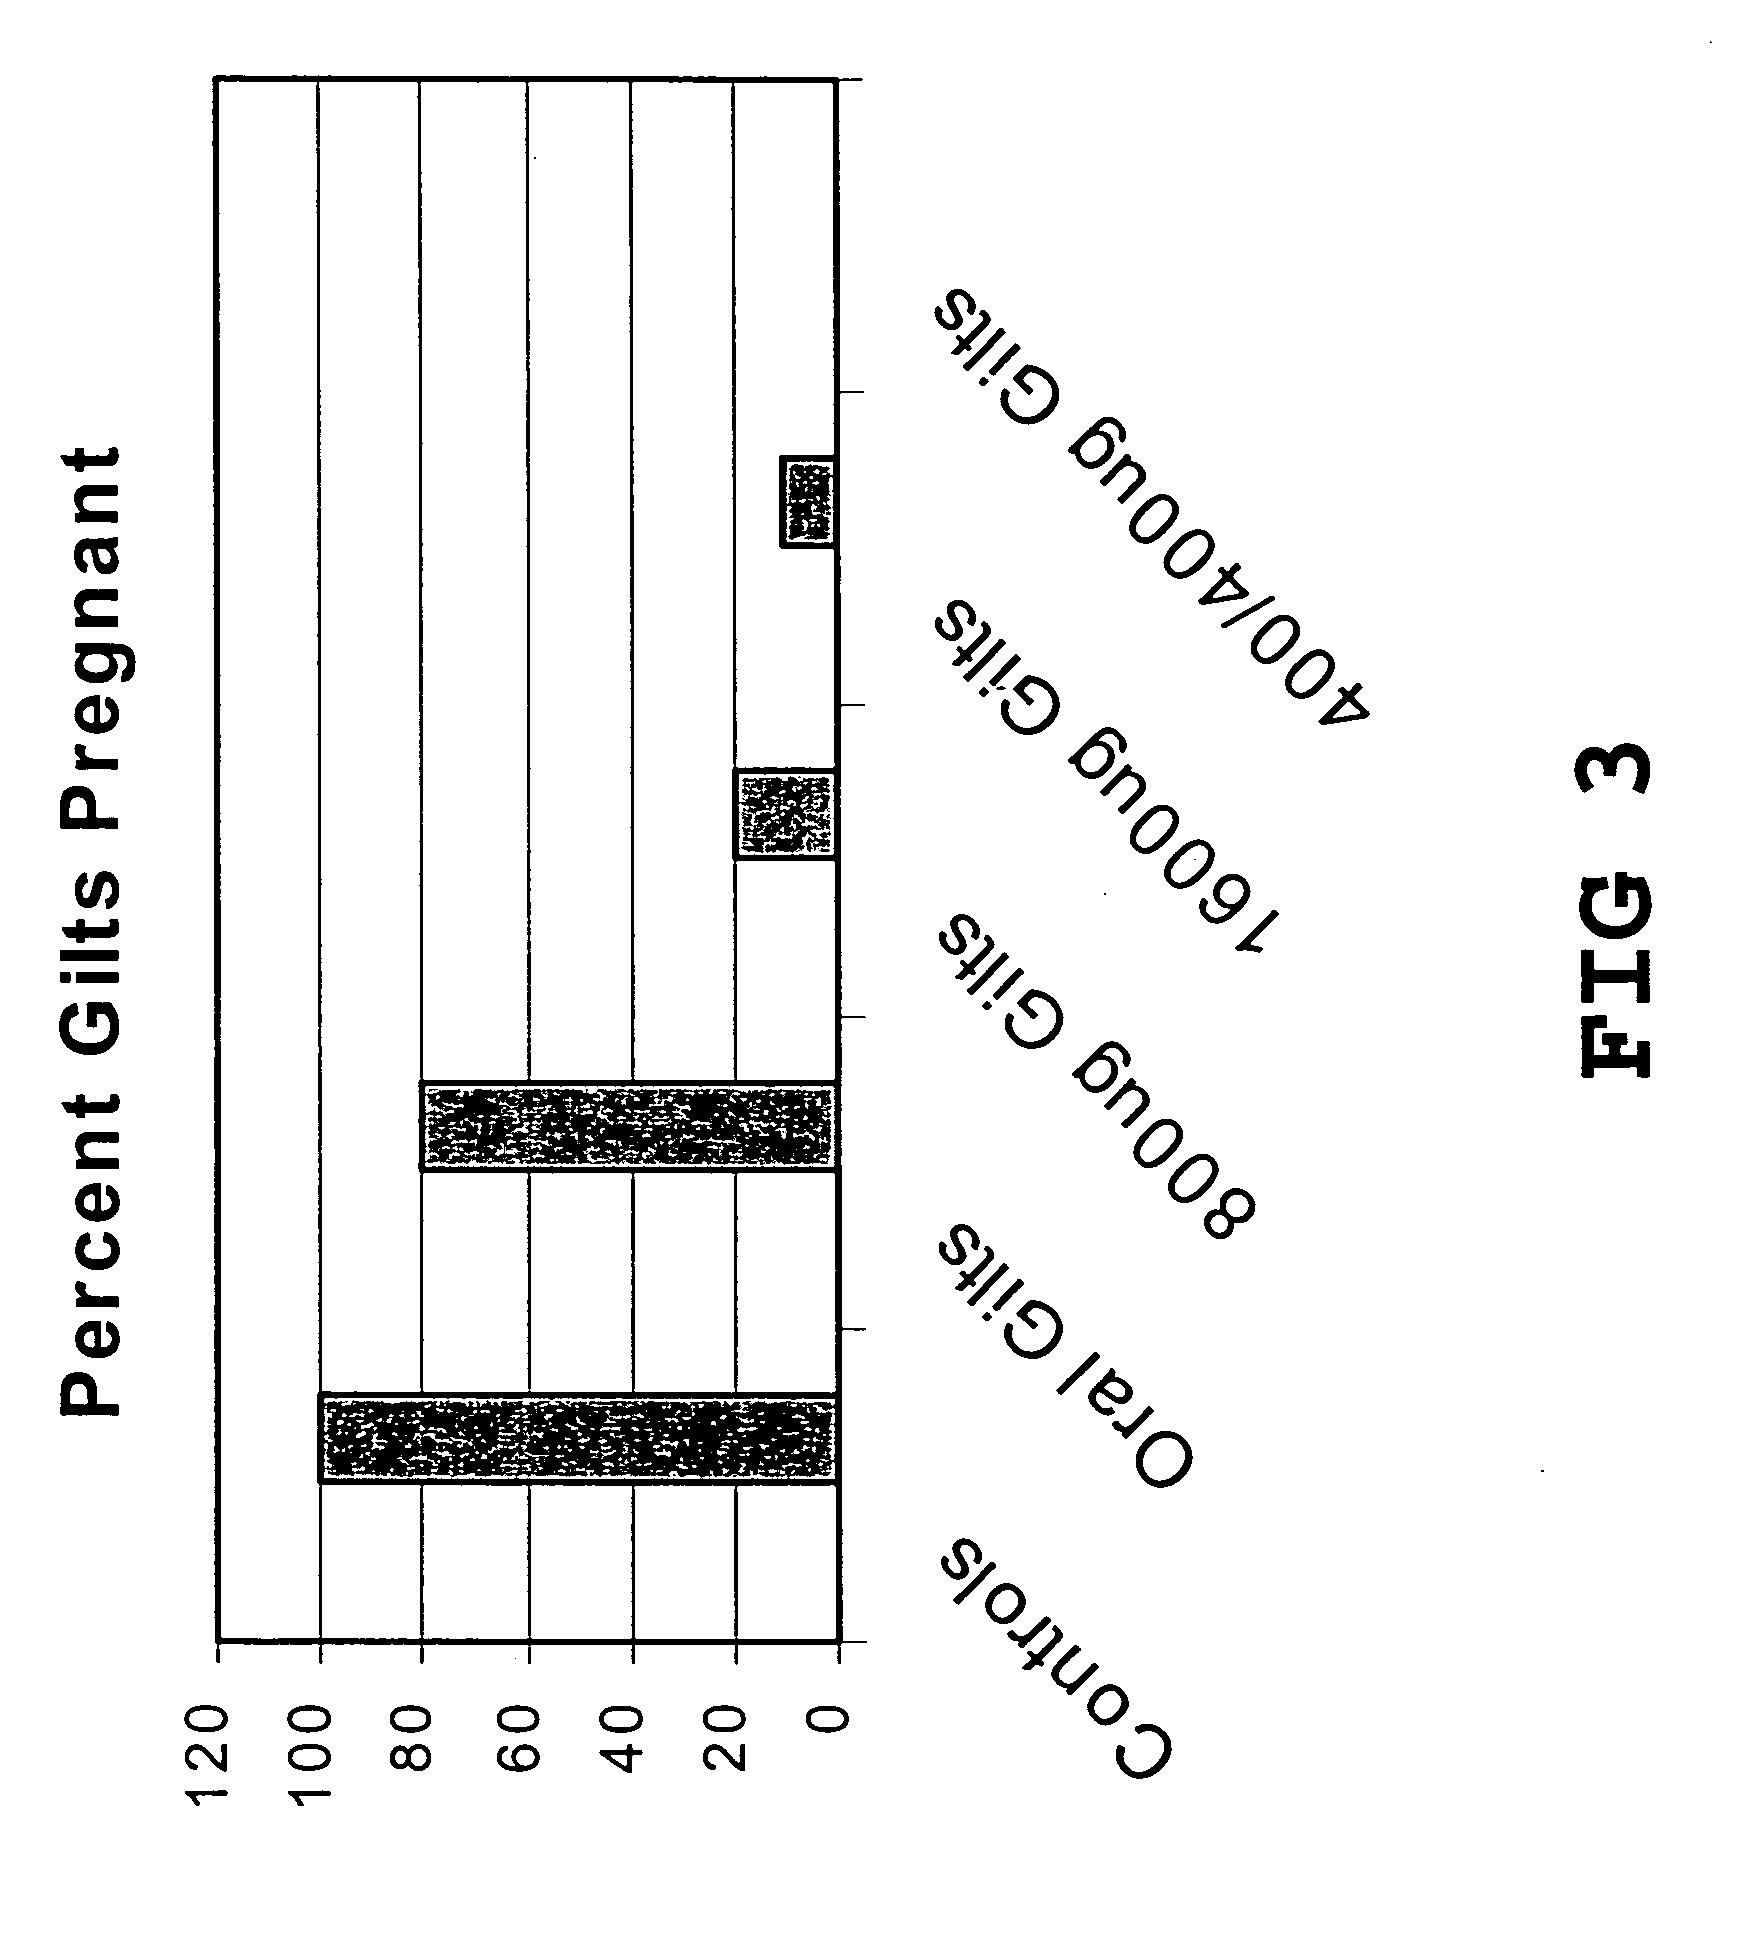 Vaccine compositions and adjuvant